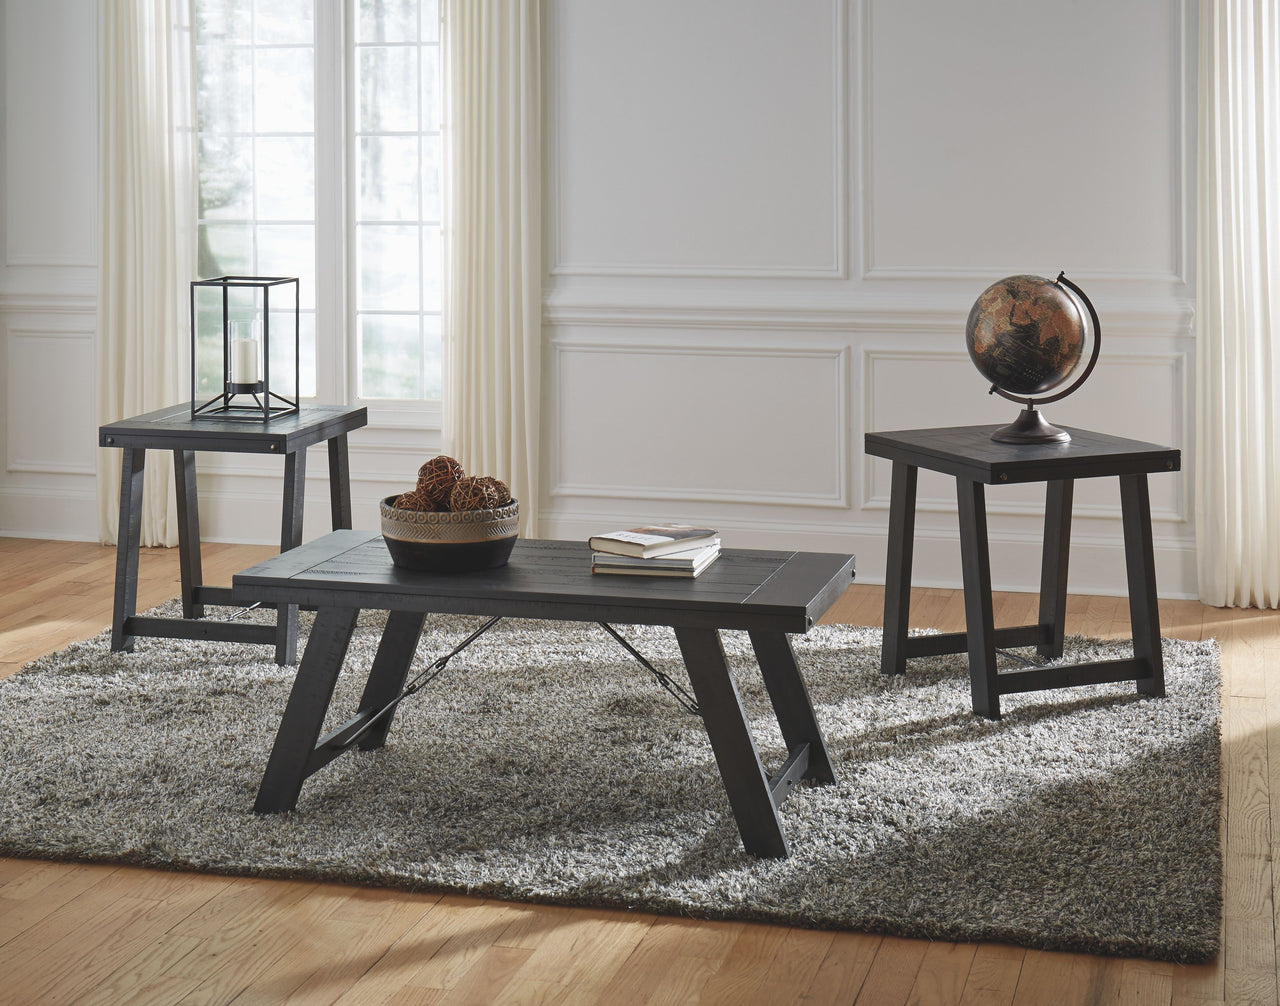 Noorbrook - Black / Pewter - Occasional Table Set (Set of 3) - Tony's Home Furnishings